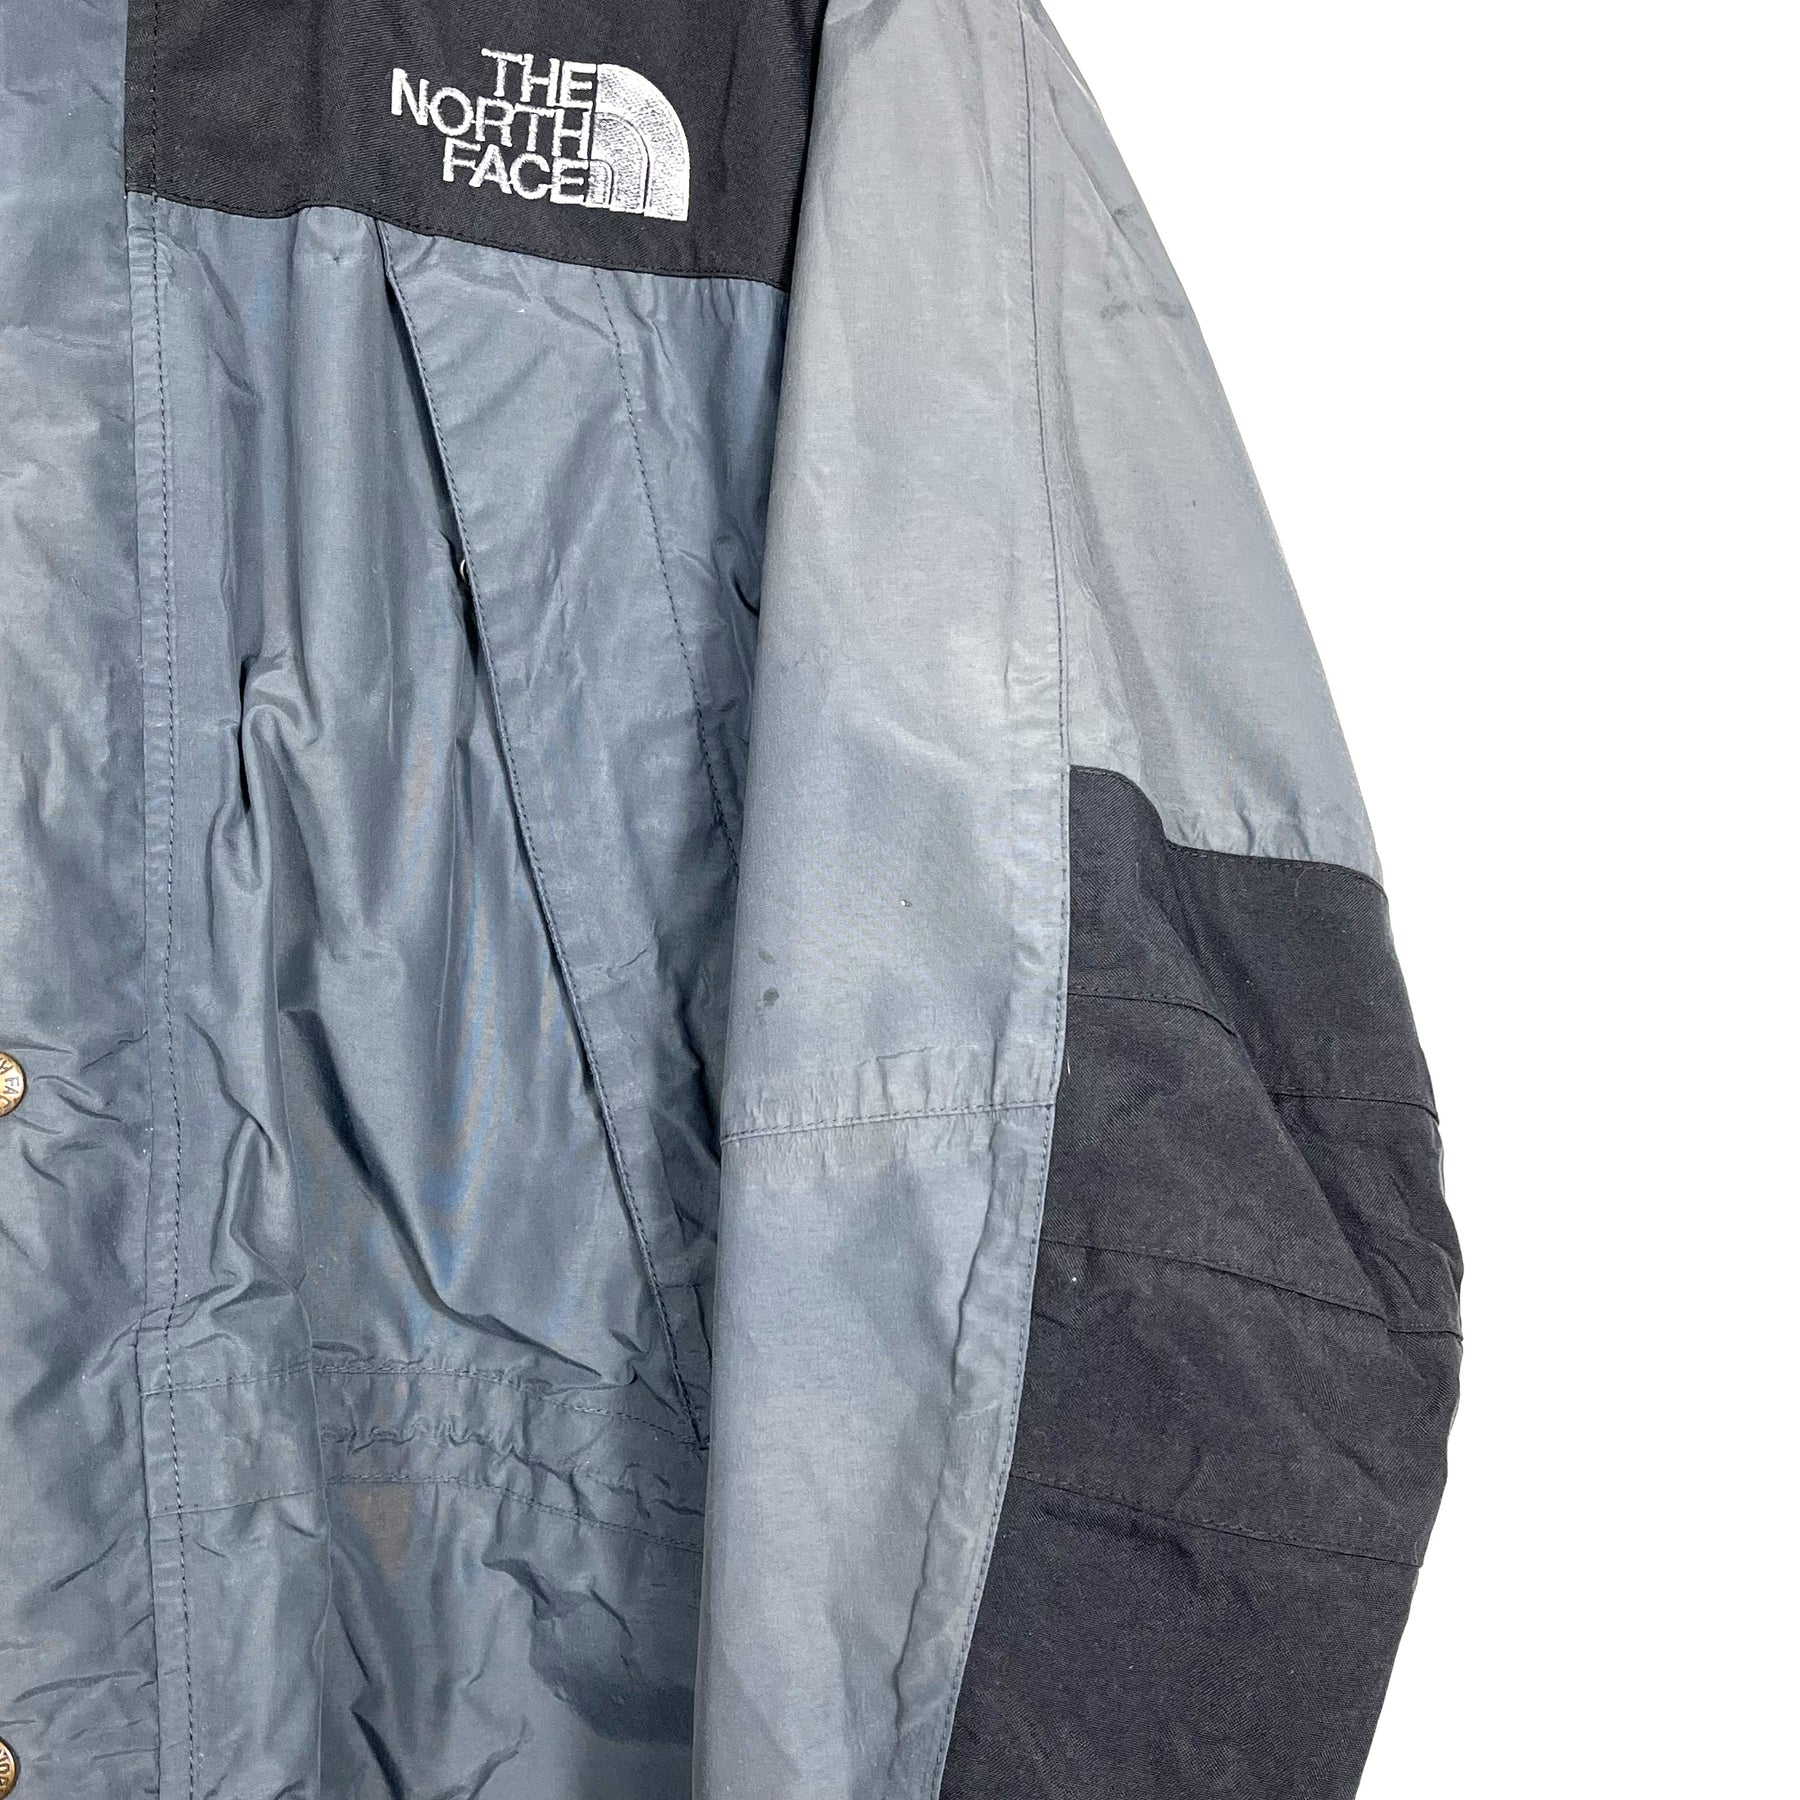 Vintage The North Face Gore Tex Lightweight Jacket - Men's Small